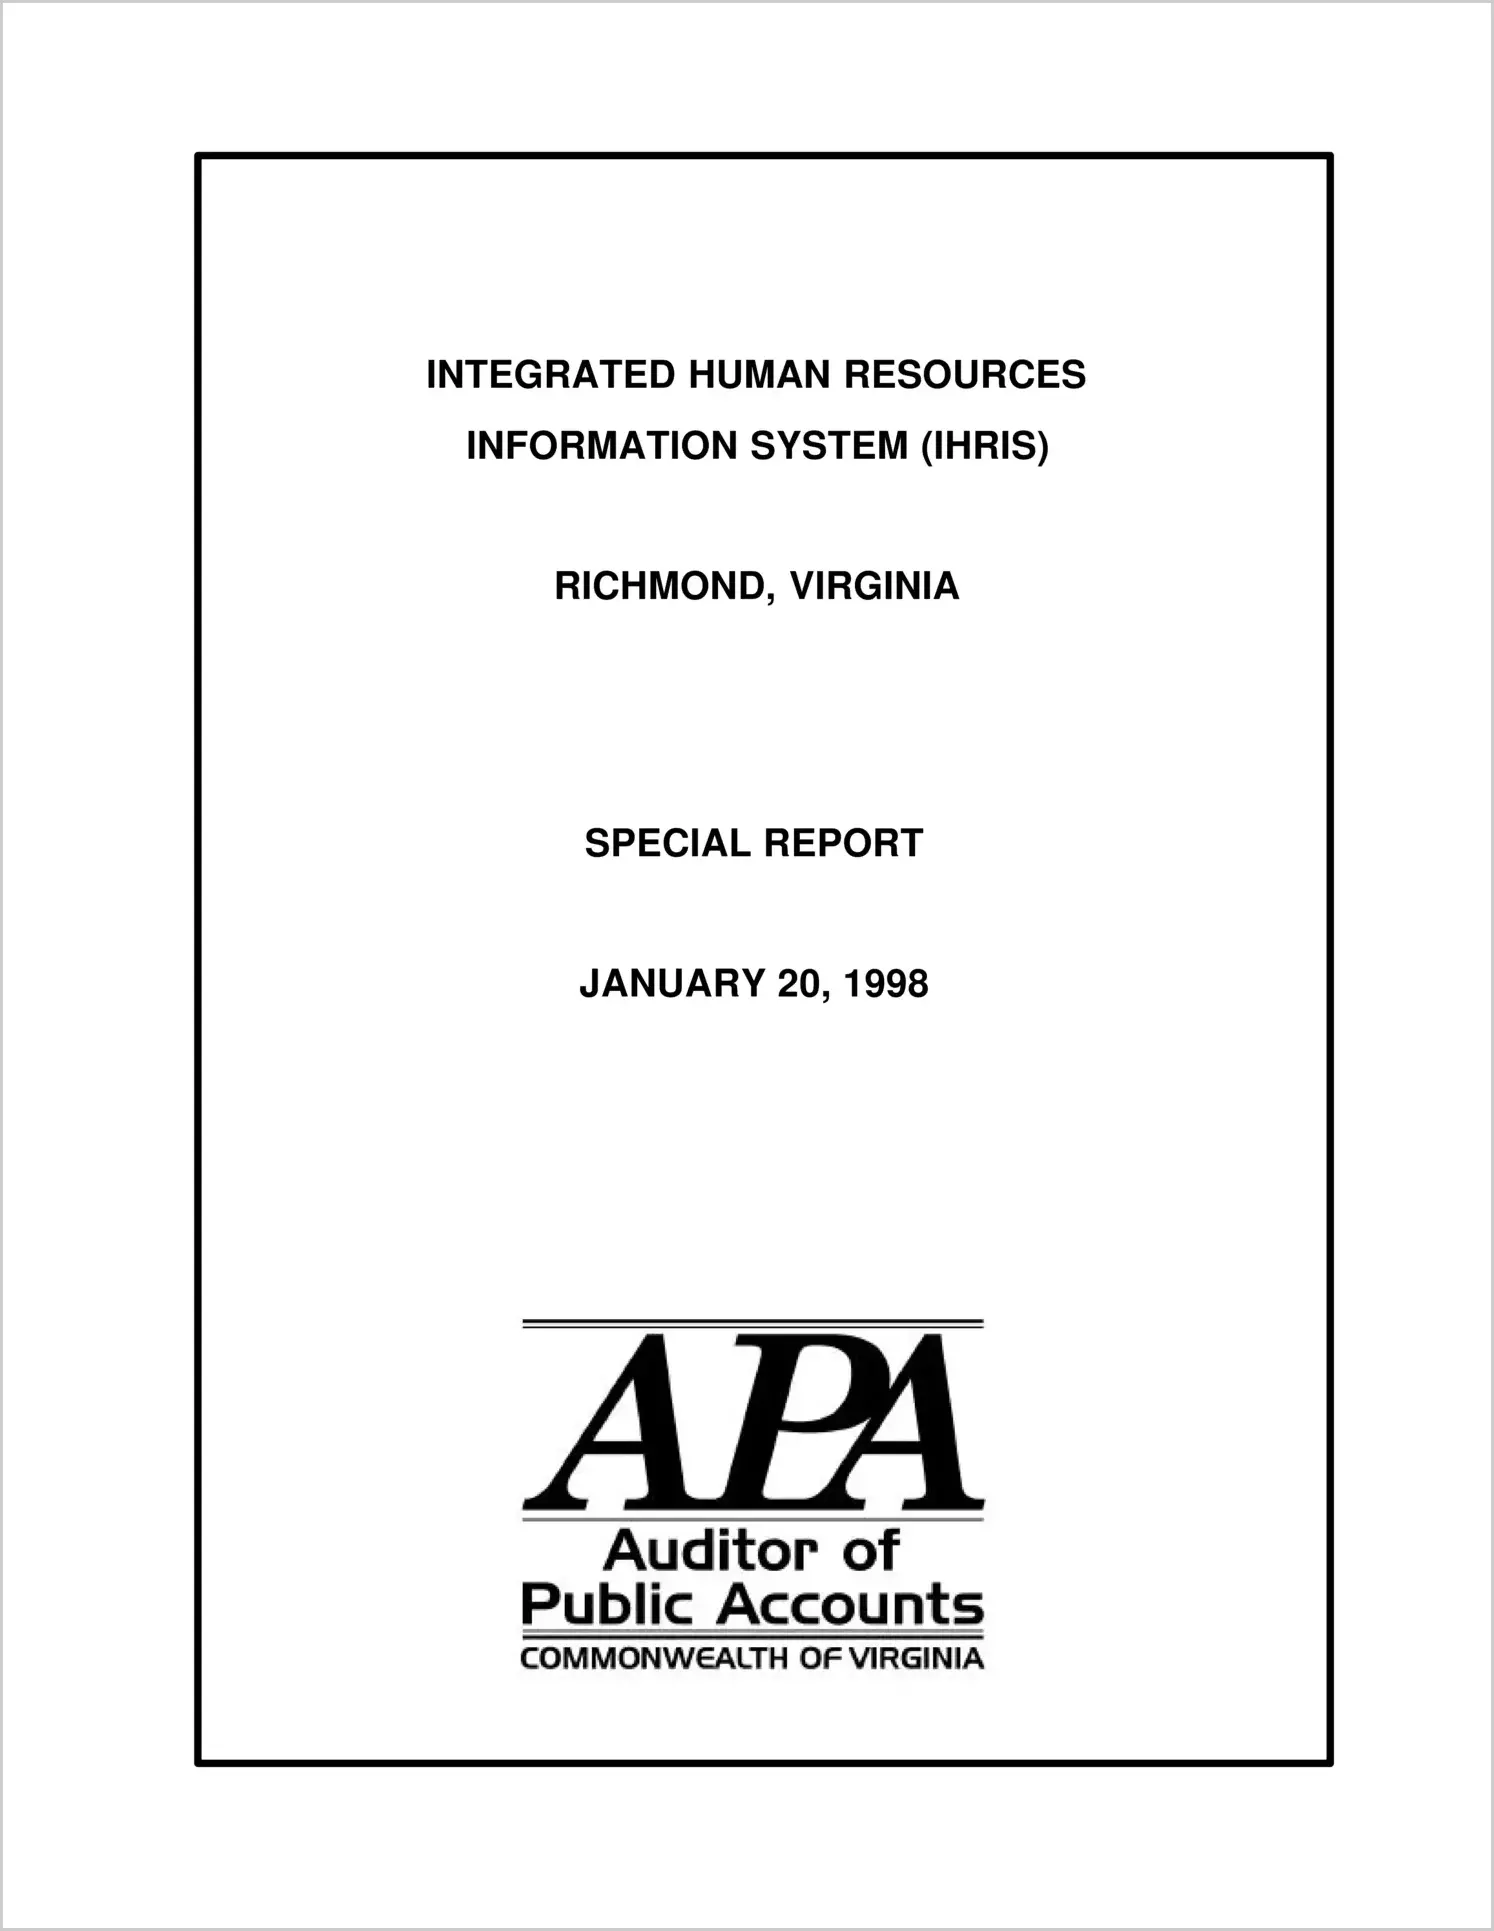 Special ReportIntegrated Human Resources Information System (IHRIS)(Report Date: 1/20/1998)